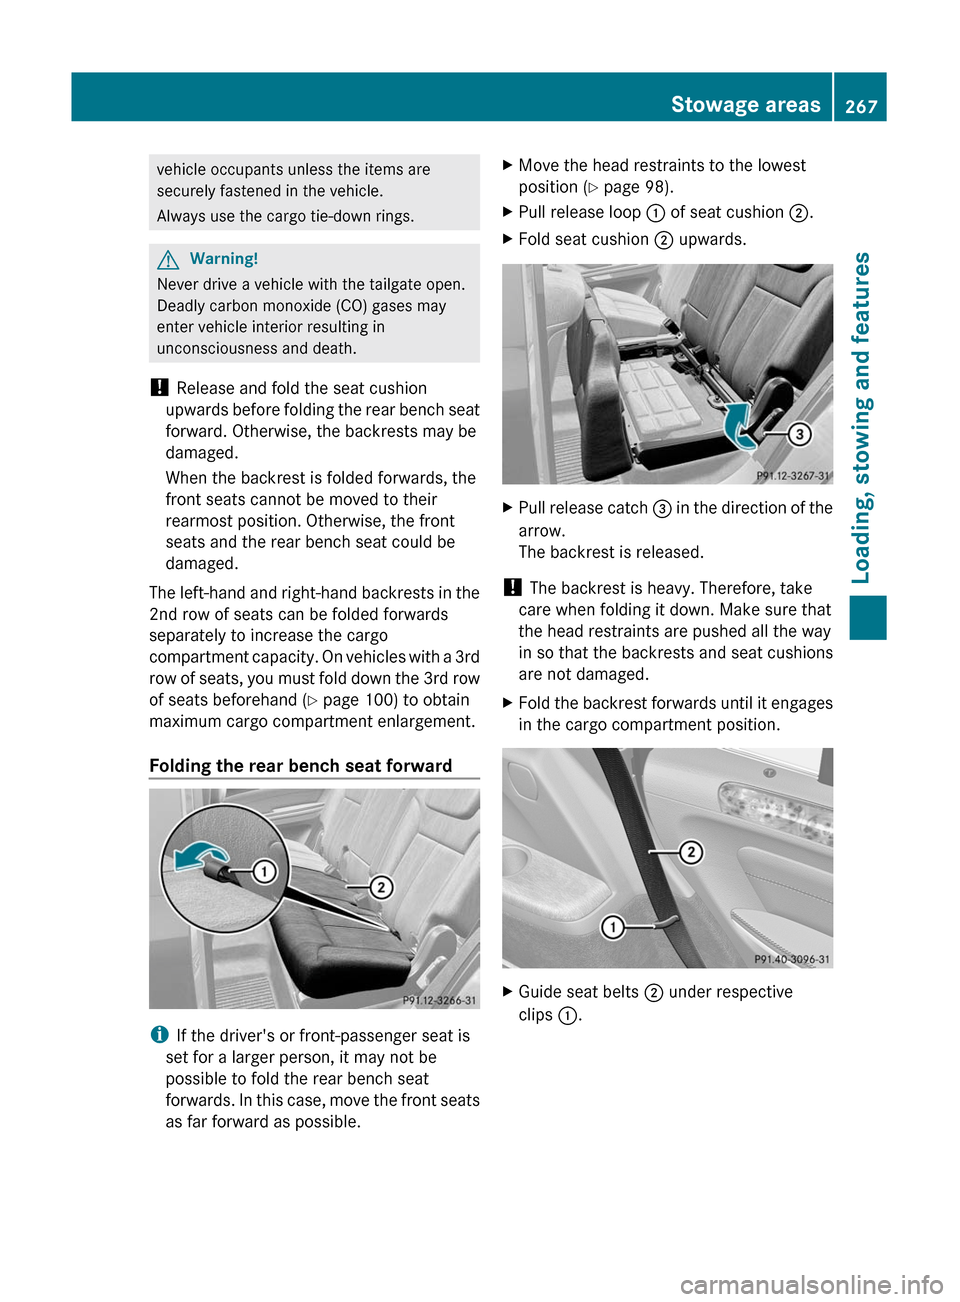 MERCEDES-BENZ GL350 BlueTEC 2011 X164 Owners Manual vehicle occupants unless the items are
securely fastened in the vehicle.
Always use the cargo tie-down rings.GWarning!
Never drive a vehicle with the tailgate open.
Deadly carbon monoxide (CO) gases m